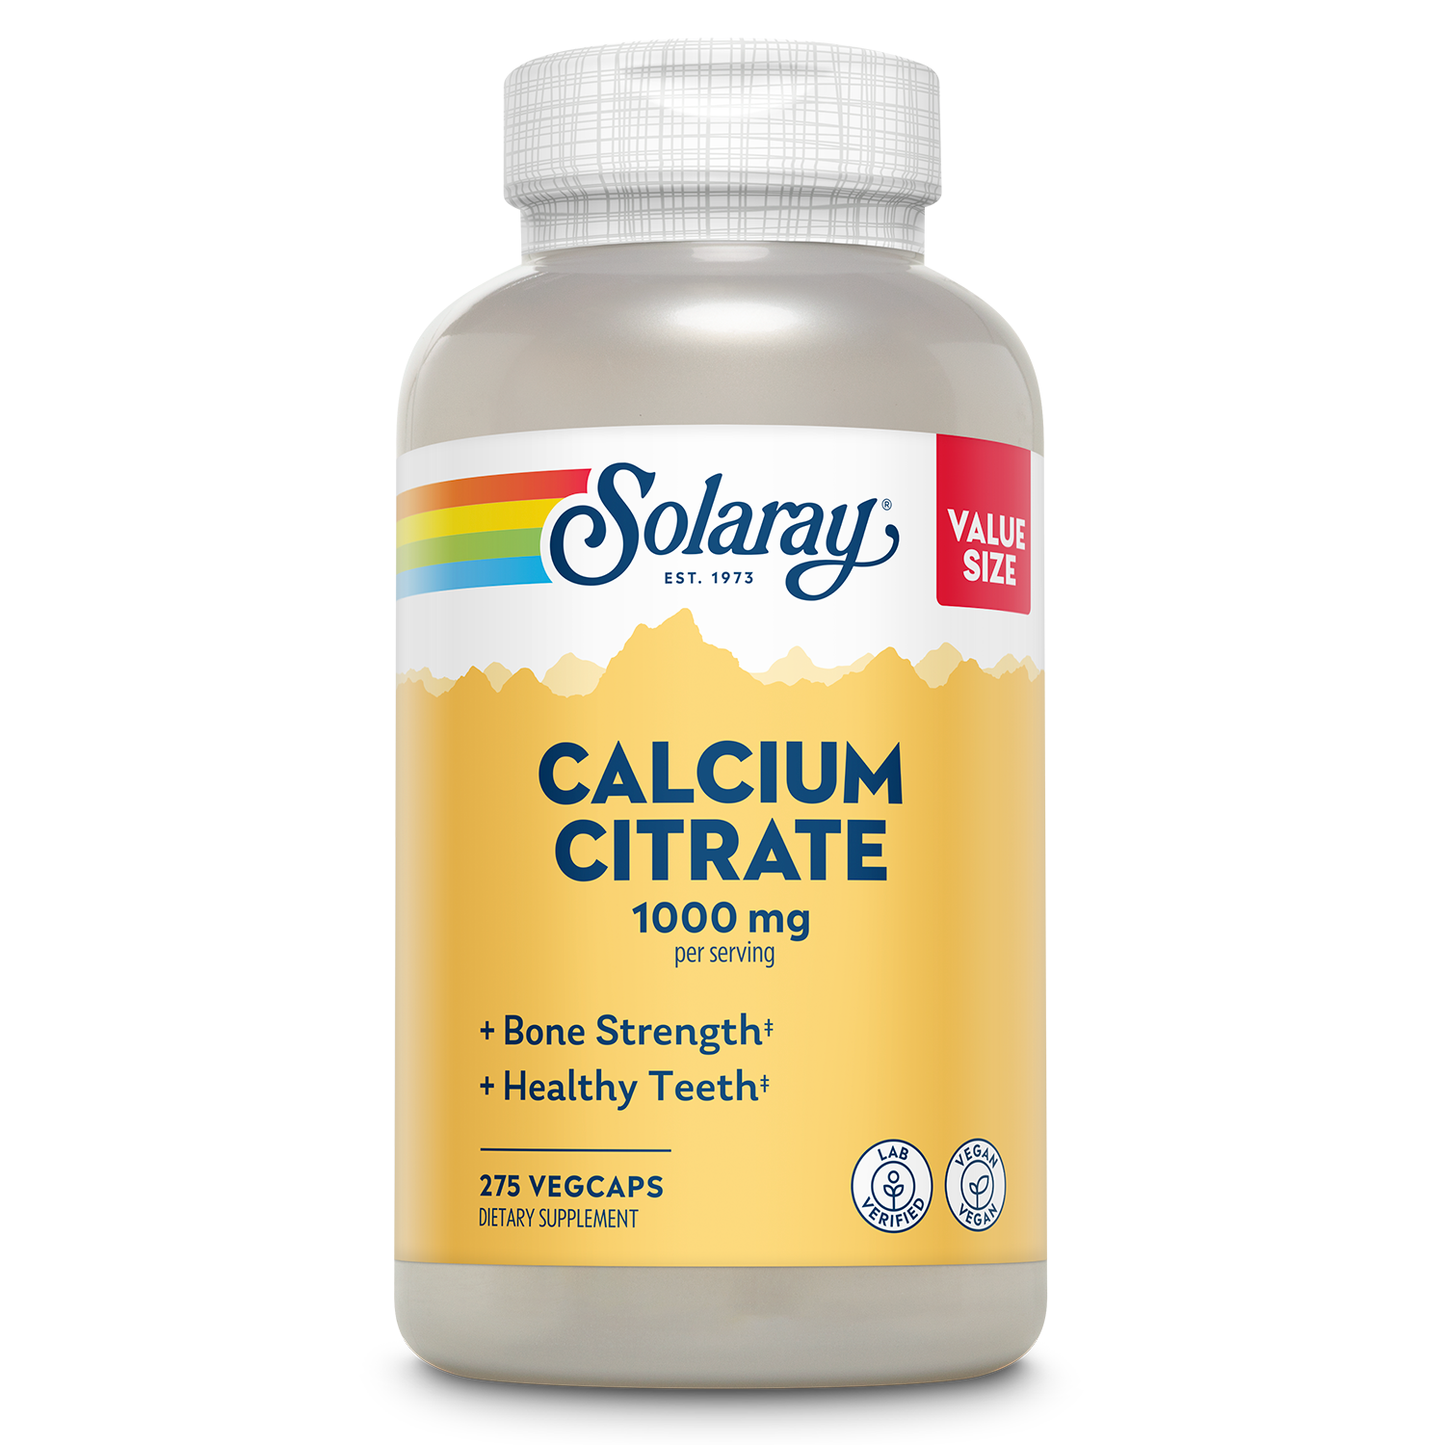 Solaray Calcium Citrate 1000mg, Chelated Calcium Supplement for Bone Strength, Healthy Teeth & Nerve, Muscle & Heart Function Support, Easy to Digest, 60-Day Guarantee, Vegan | 30 Servings | 120ct (68 Serv, 275 Count)